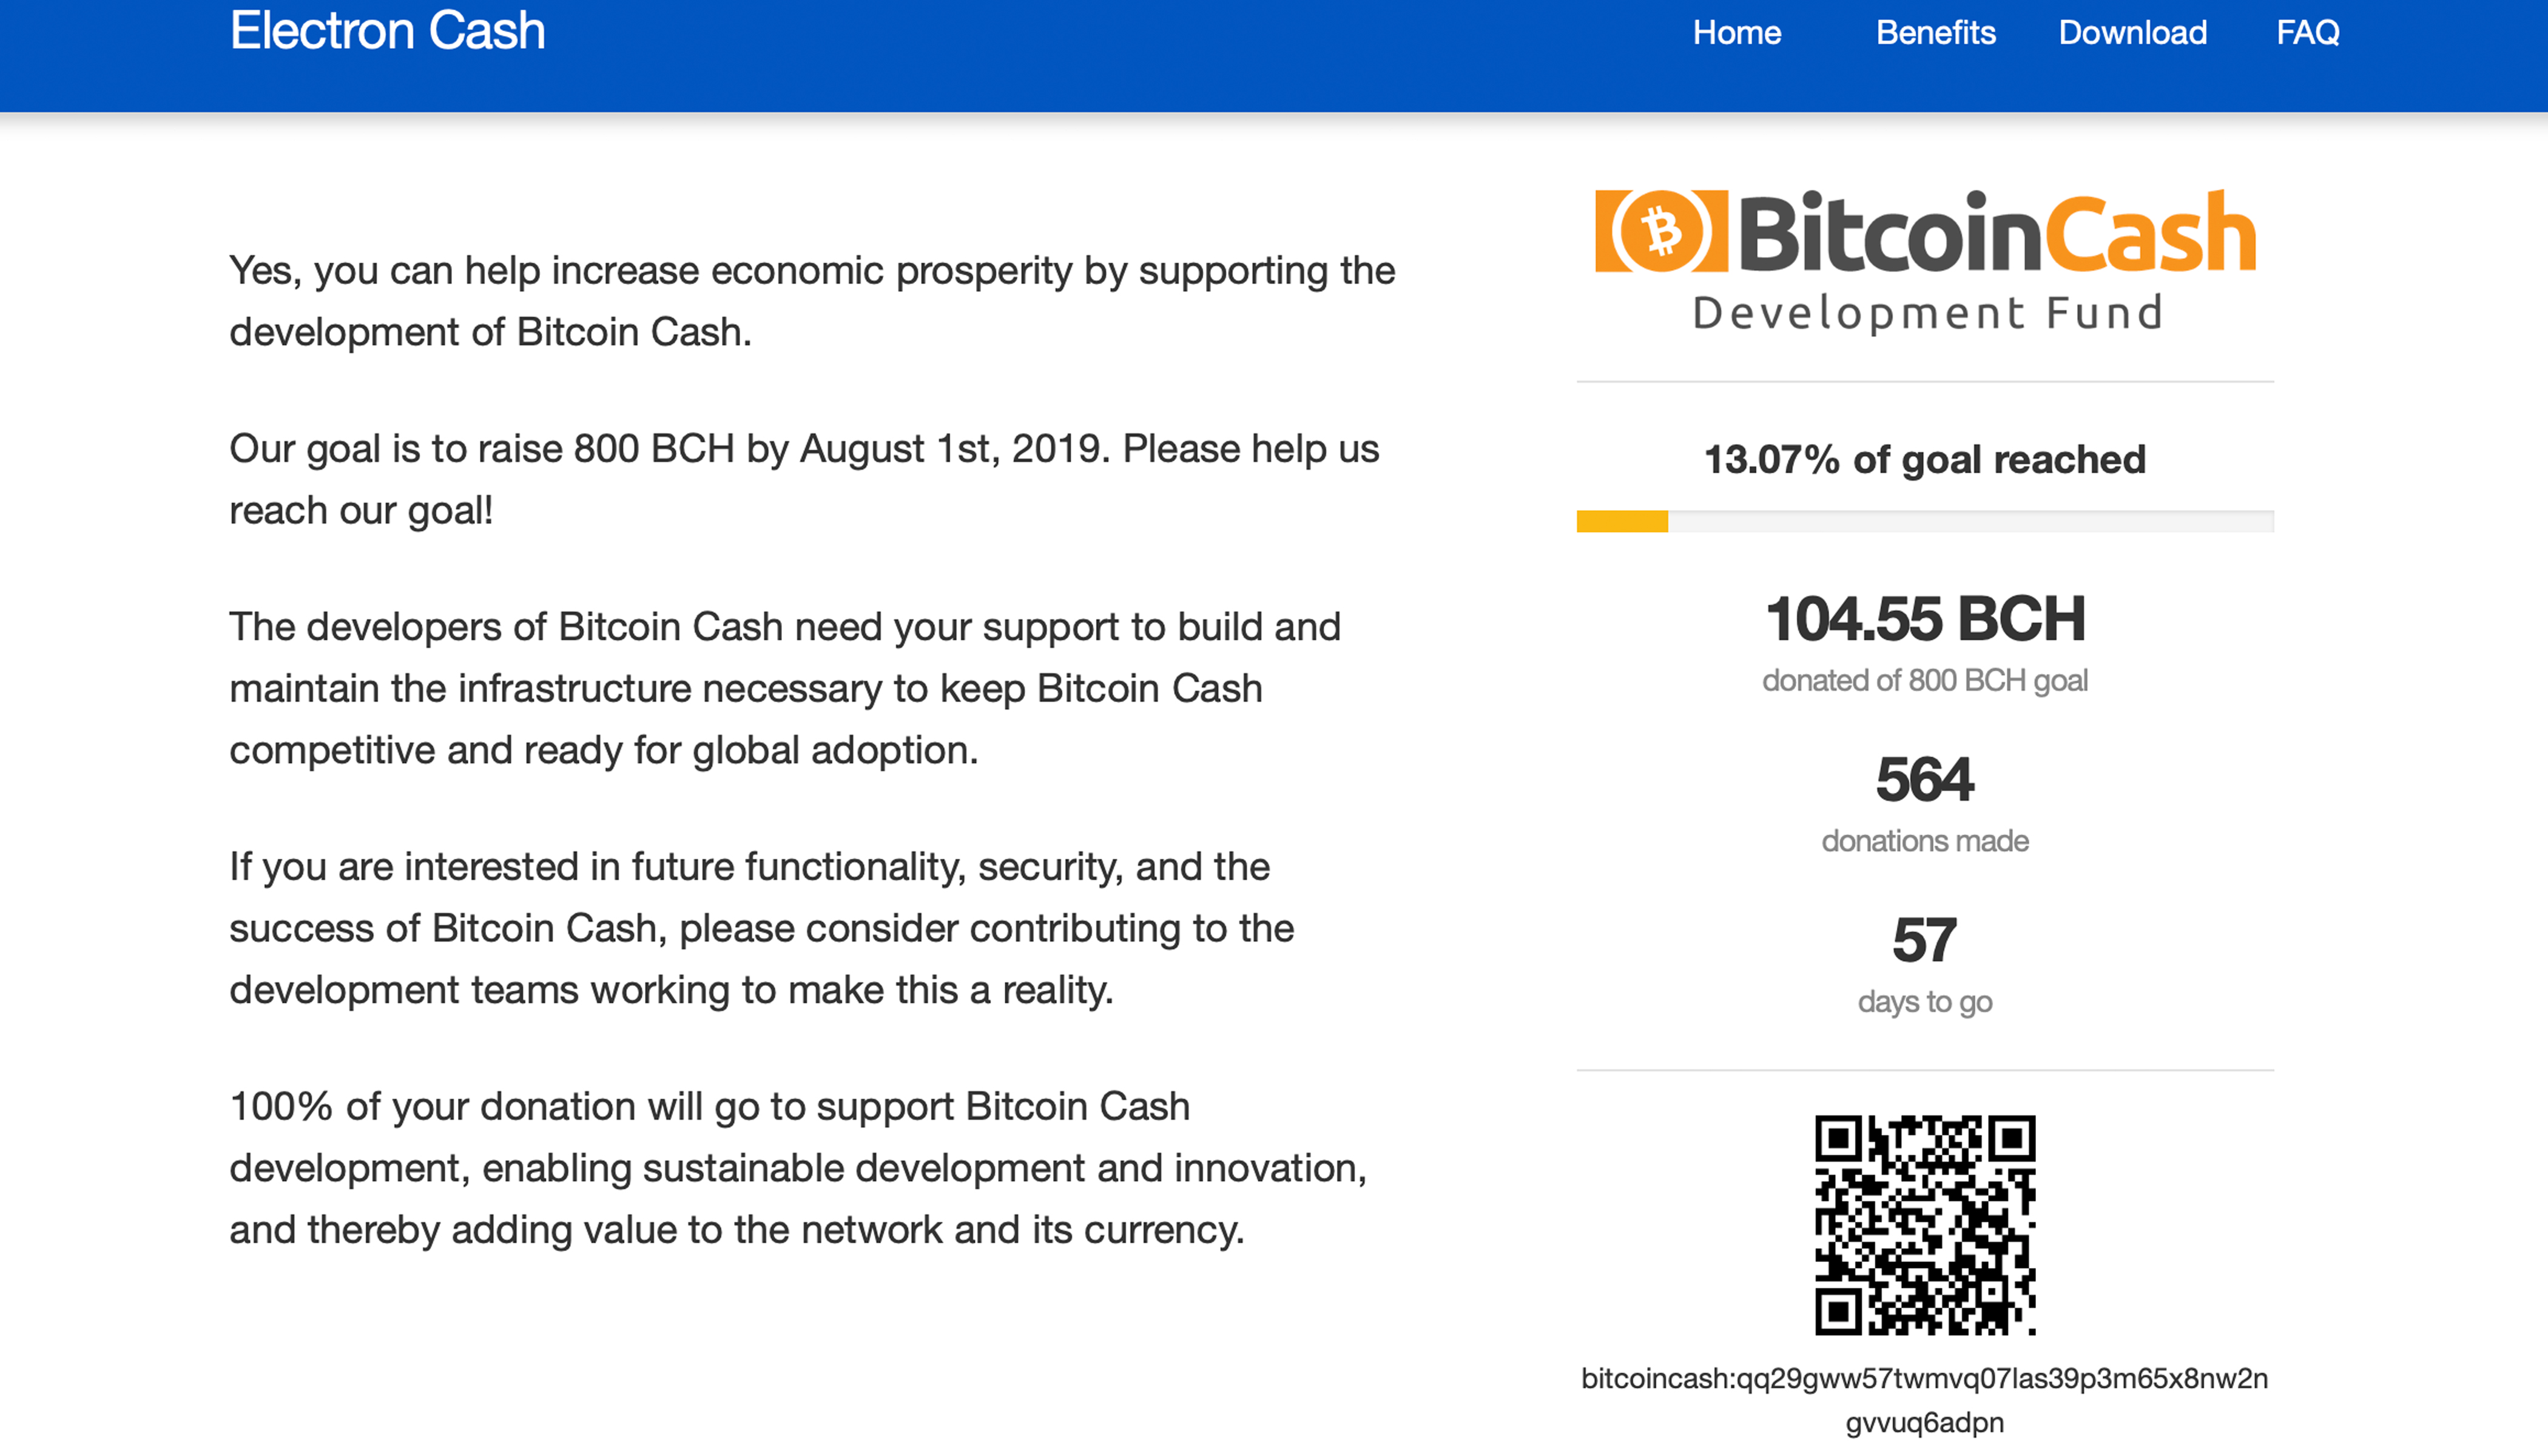 BCH Businesses Launch Development Fund for Bitcoin Cash